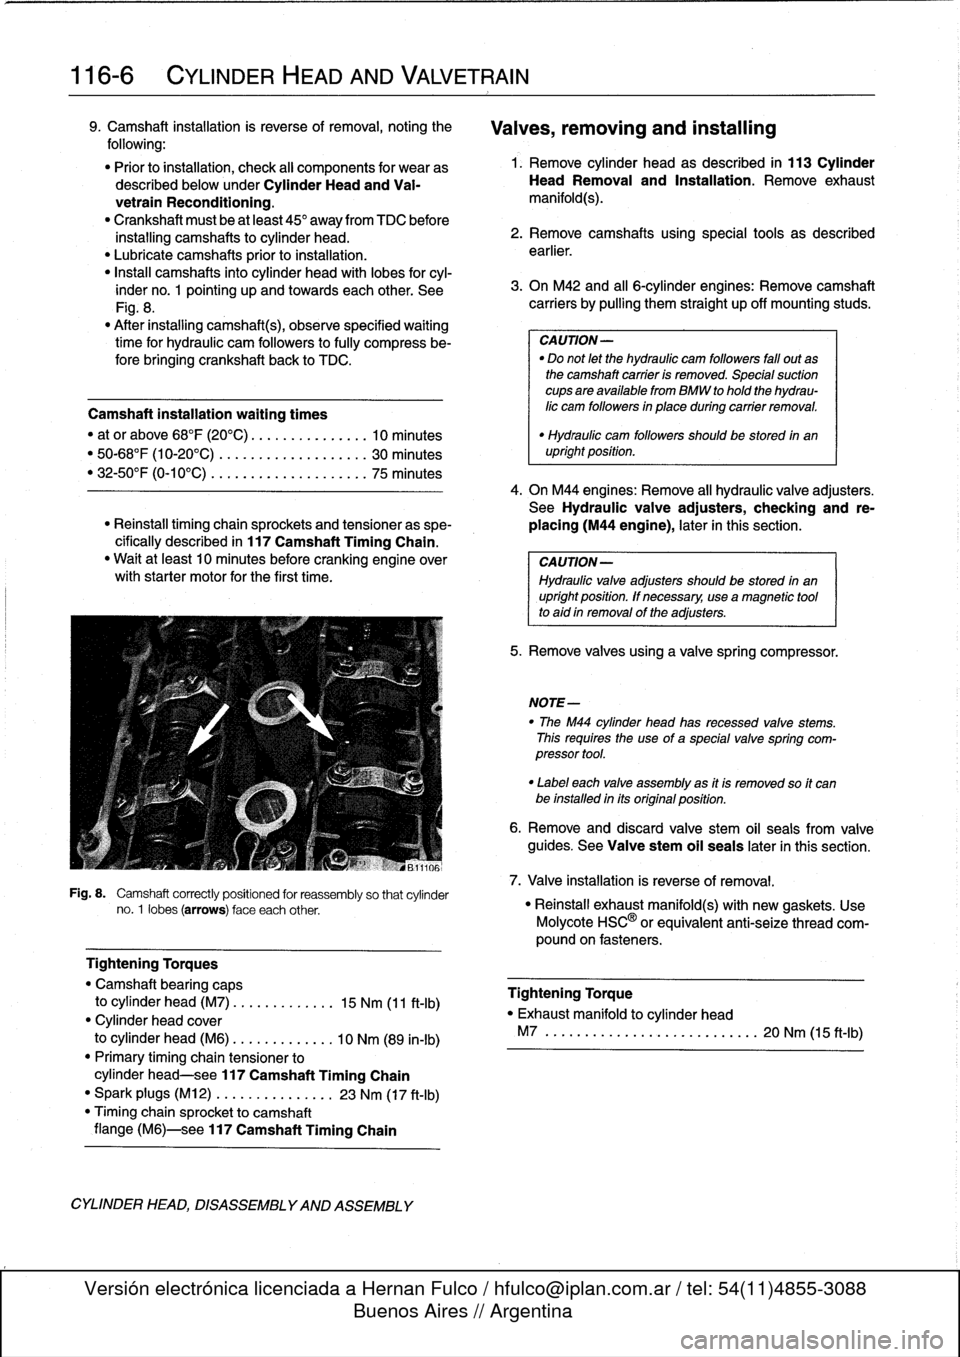 BMW M3 1993 E36 Owners Manual 
116-
6

	

CYLINDER
HEAD
AND
VALVETRAIN

9
.
Camshaft
installation
is
reverse
of
removal,noting
the

following
:

"
Prior
to
installation,
check
al¡
components
for
wear
as
described
below
under
Cyli